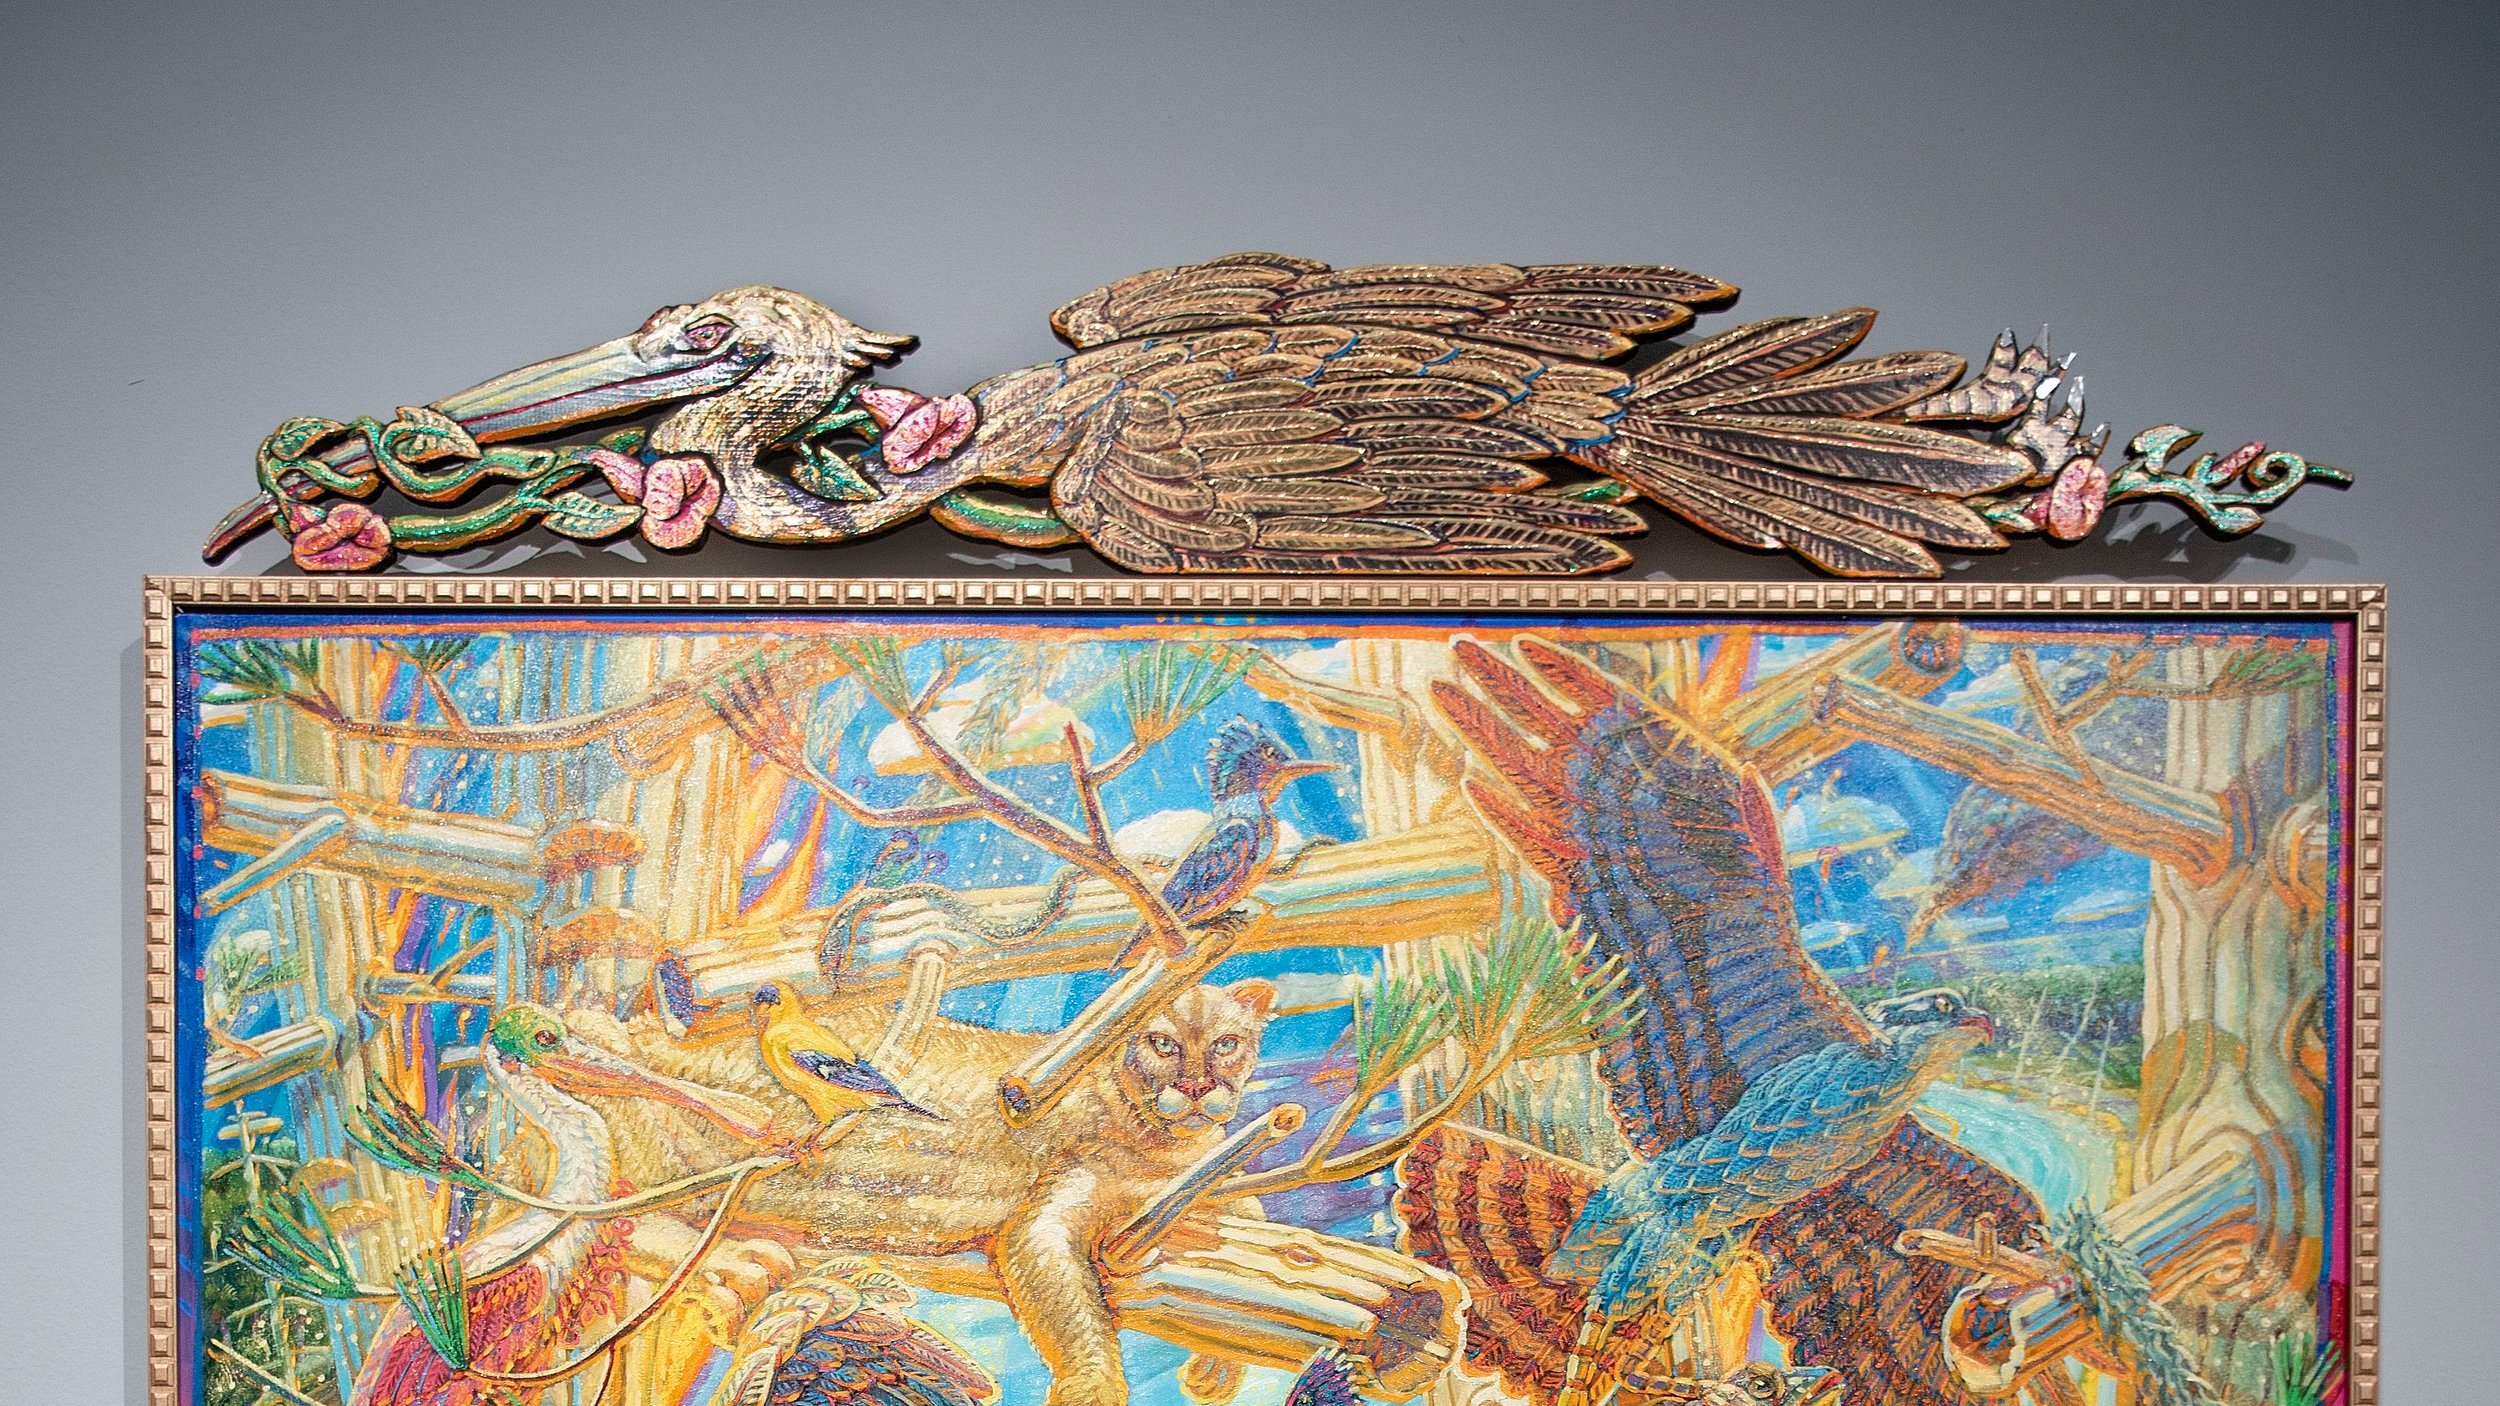  IMAGE (detail): Mark Messersmith (American, b. 1955),  Summer 2010 , 2010, mixed media on canvas with predella boxes and carved wood, Gift of the Artist, L2021.12a,b 